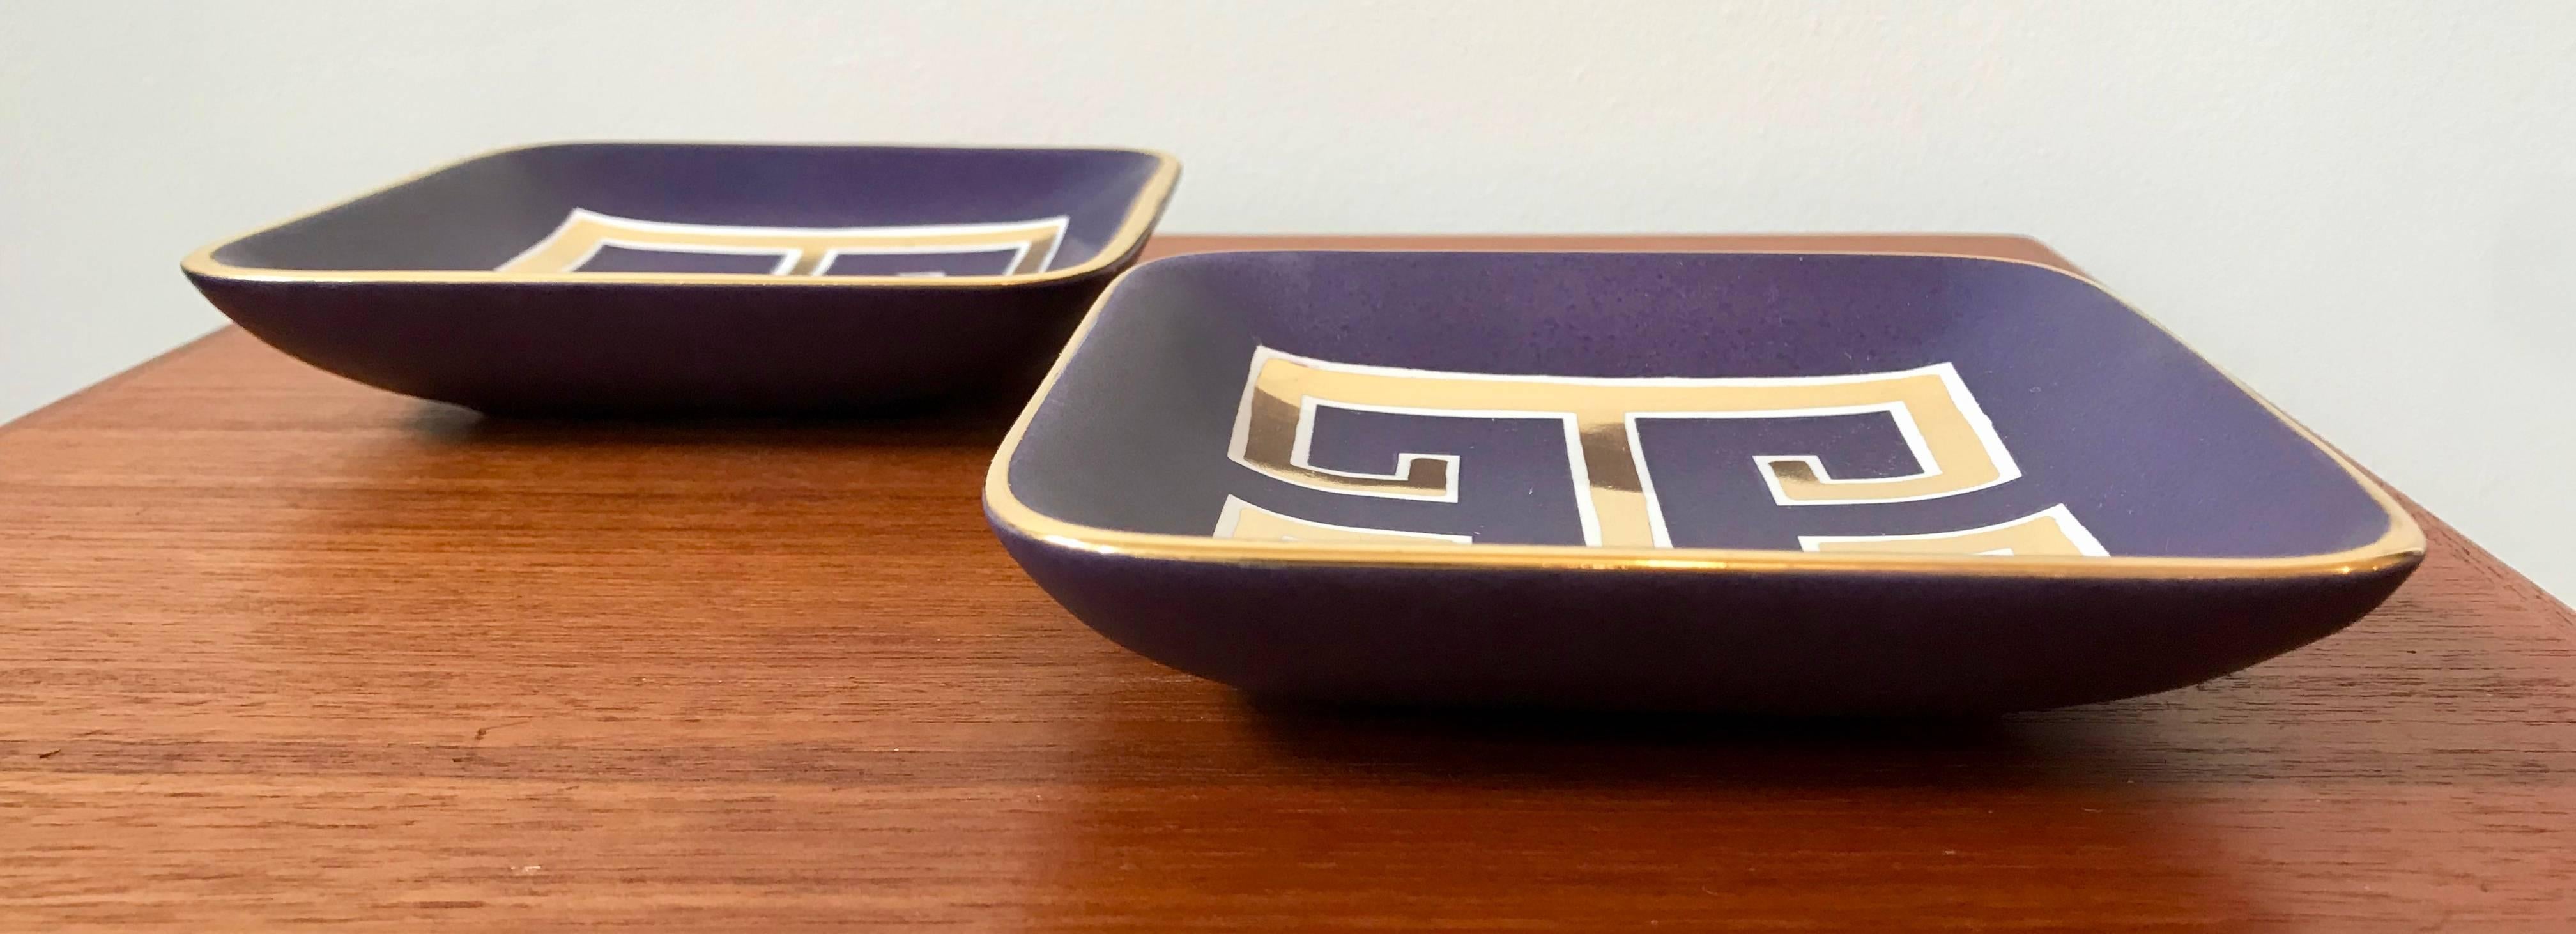 Pair of Waylande Gregory Small Square Purple Ceramic Trays with Gold Key Pattern In Good Condition For Sale In Bedford Hills, NY